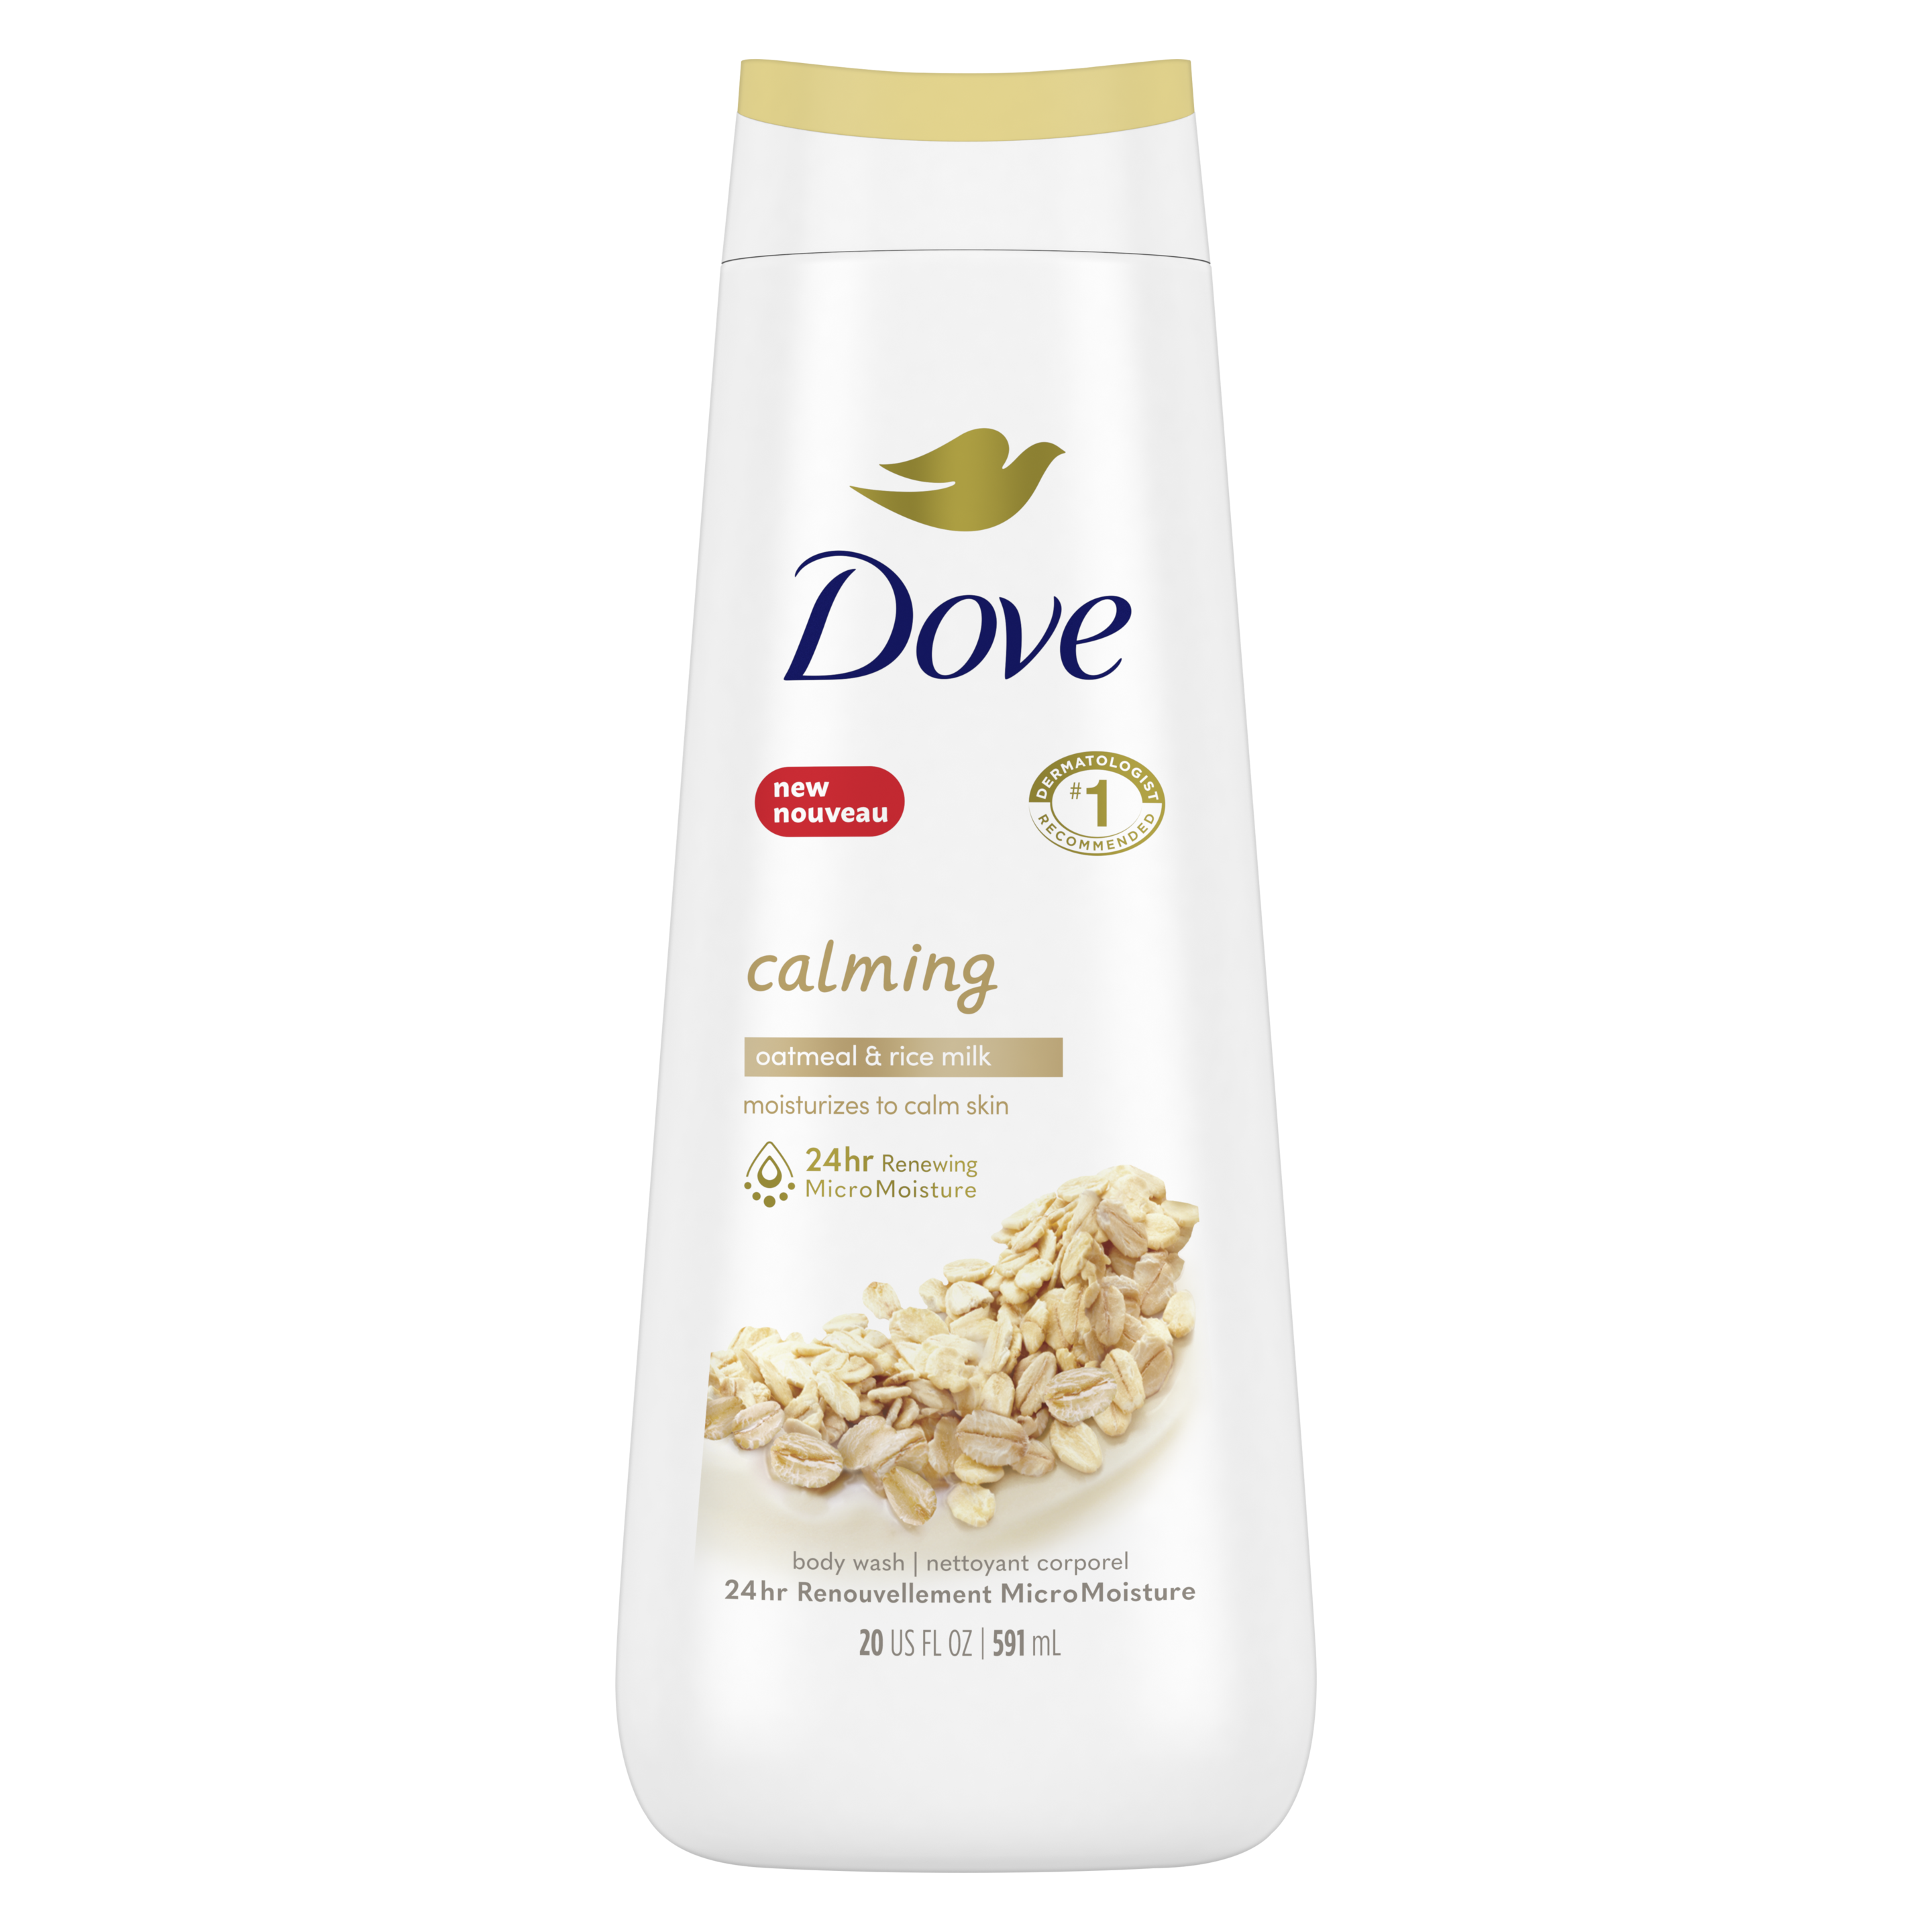 Calming Body Wash with Oatmeal & Rice Milk